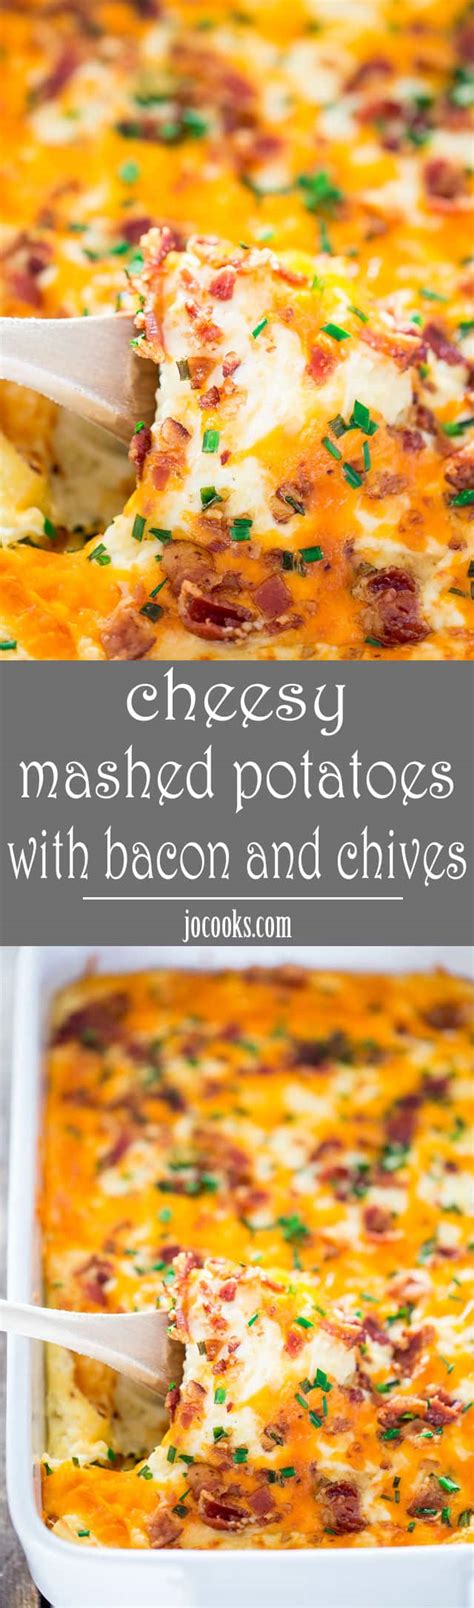 cheesy-mashed-potatoes-with-bacon-and-chives-jo image